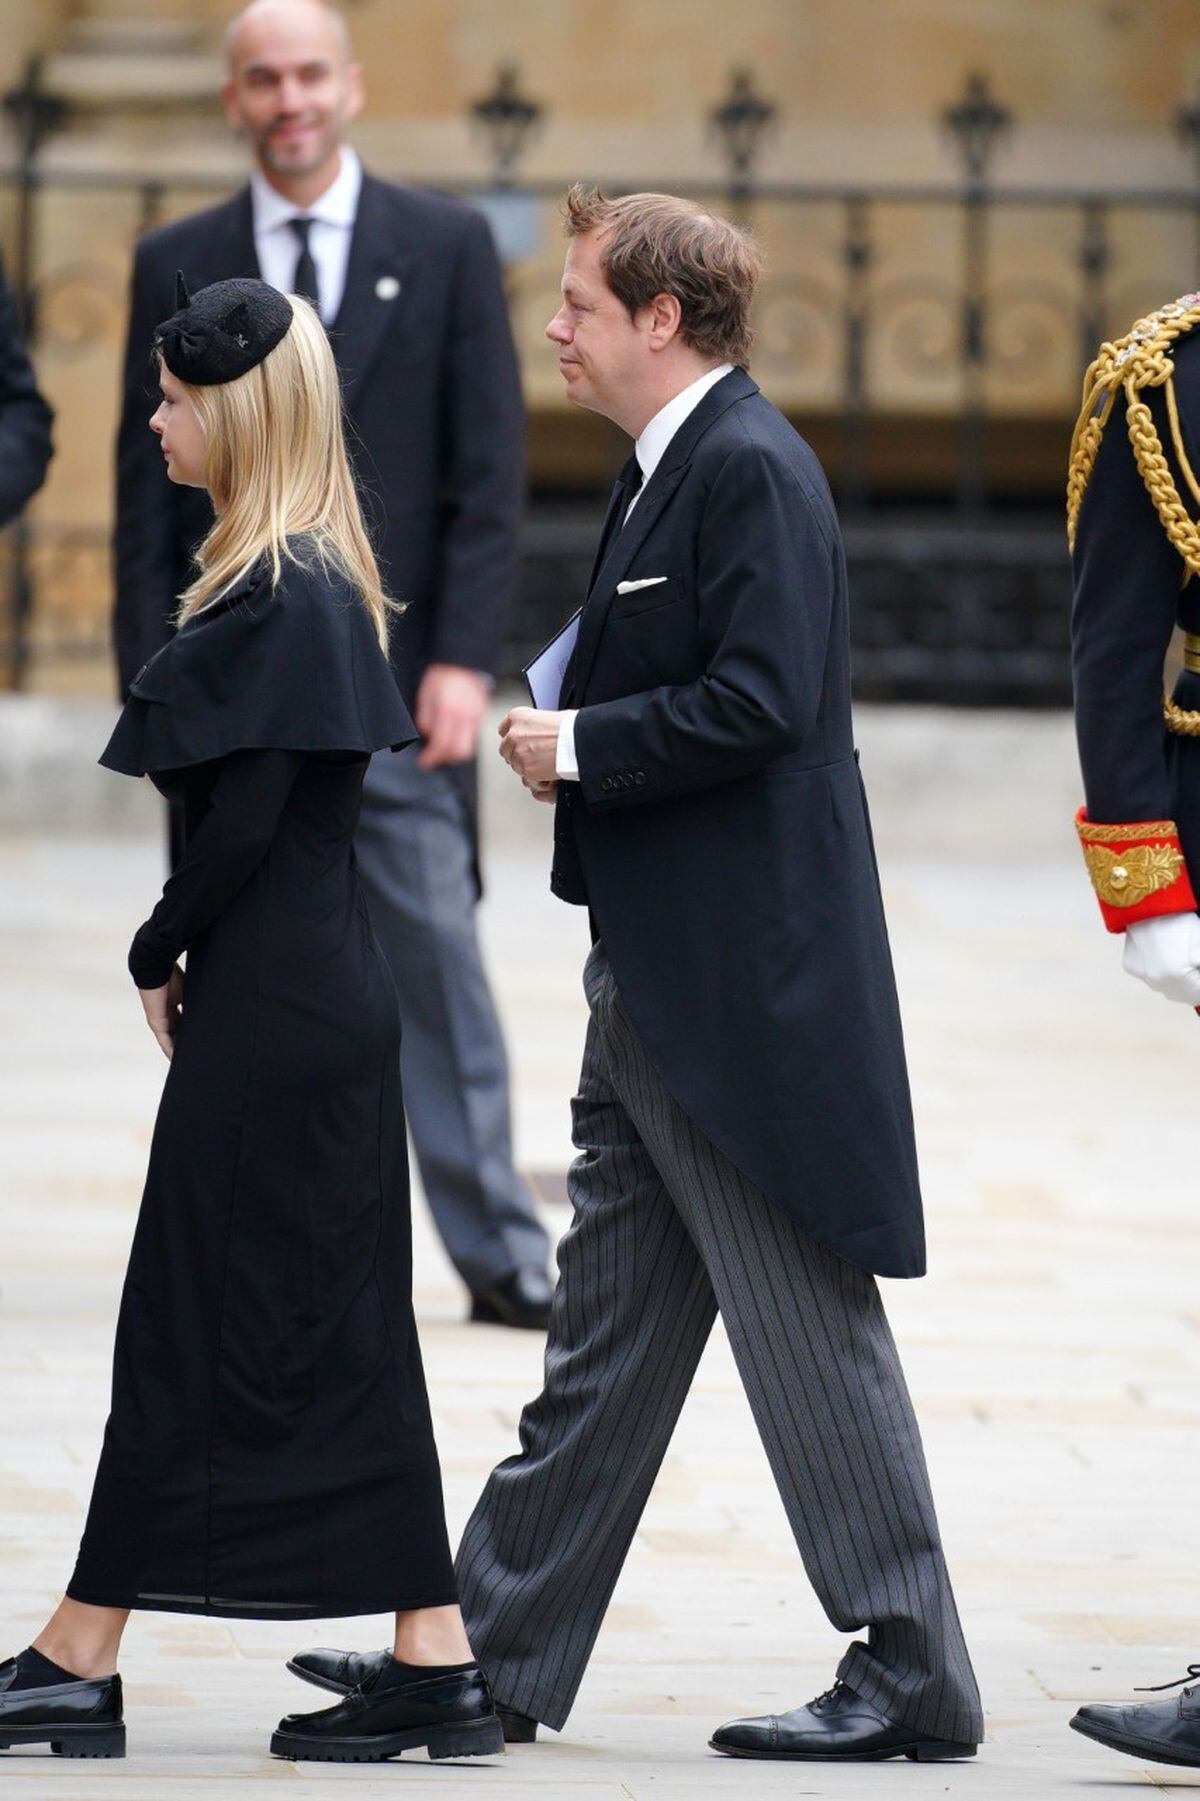 Daughter of the Queen Consort, Laura Parker Bowles also wore one of the hats to the funeral on Monday